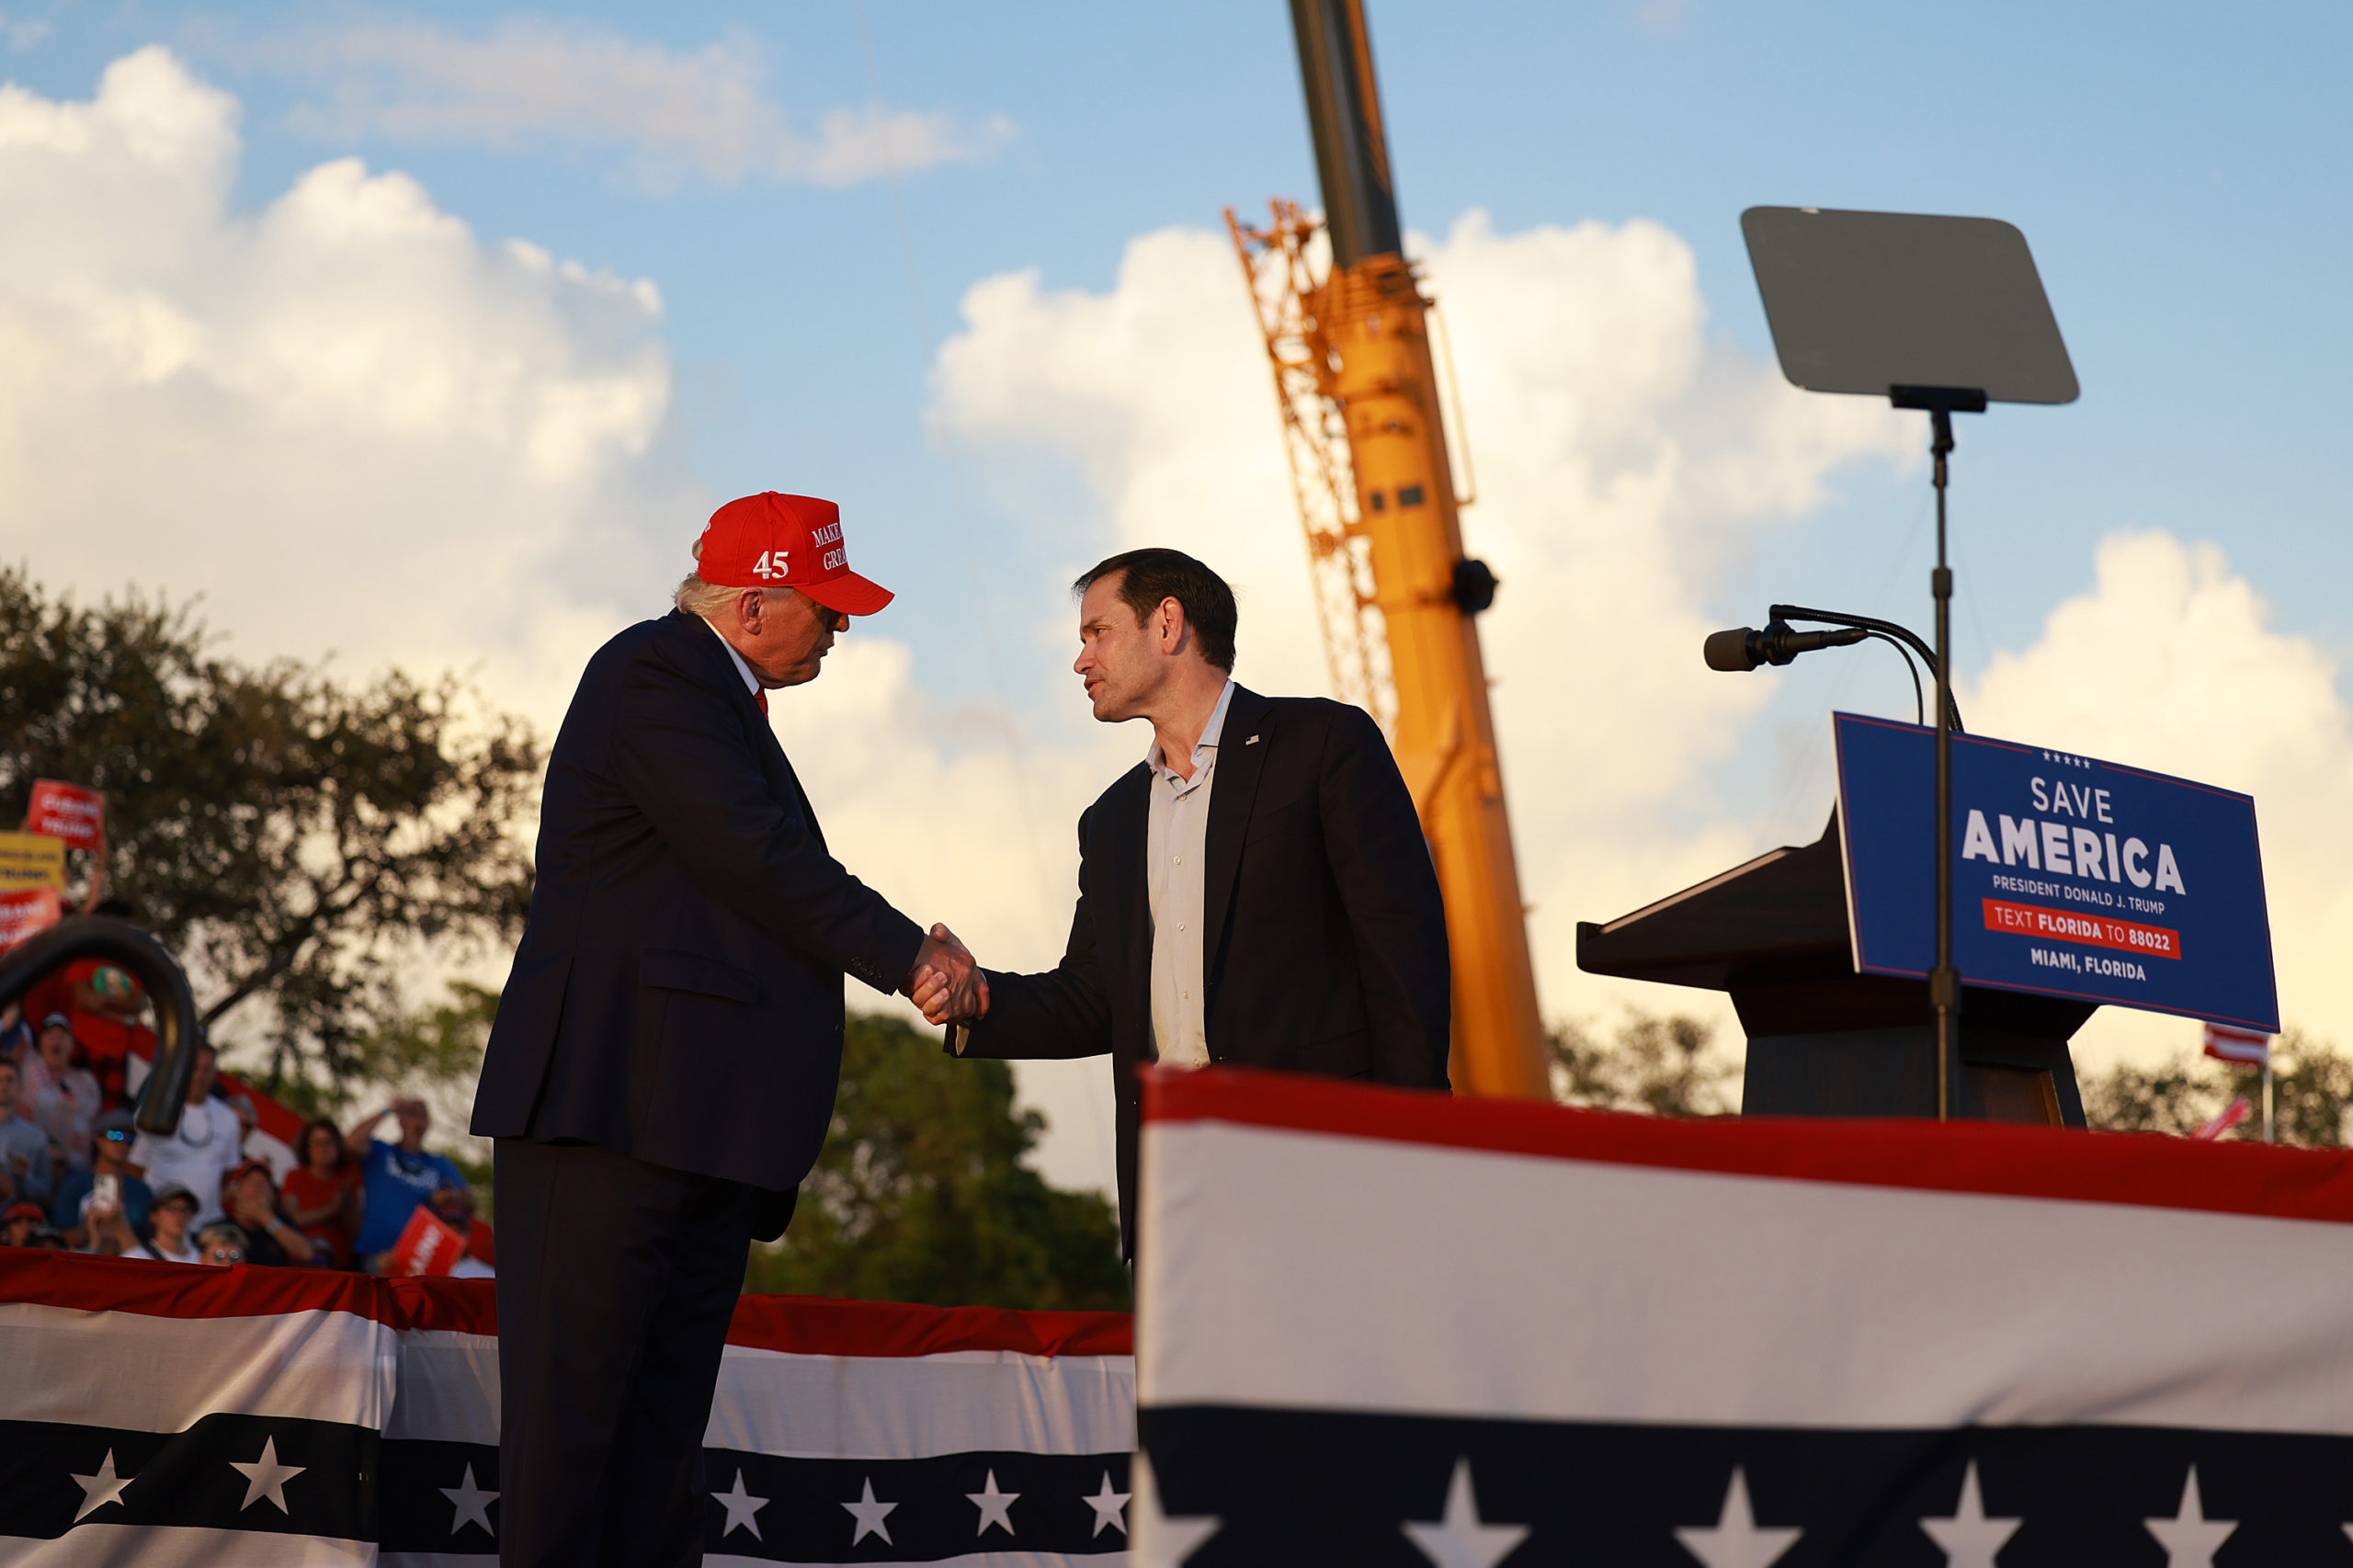 MIAMI, FLORIDA - NOVEMBER 06: Former U.S. President Donald Trump shakes hands with Sen. Marco Rubio (R-FL) during a rally at the Miami-Dade County Fair and Exposition on November 6, 2022 in Miami, Florida. Rubio faces U.S. Rep. Val Demings (D-FL) in his reelection bid in Tuesday's general election. (Photo by Joe Raedle/Getty Images)